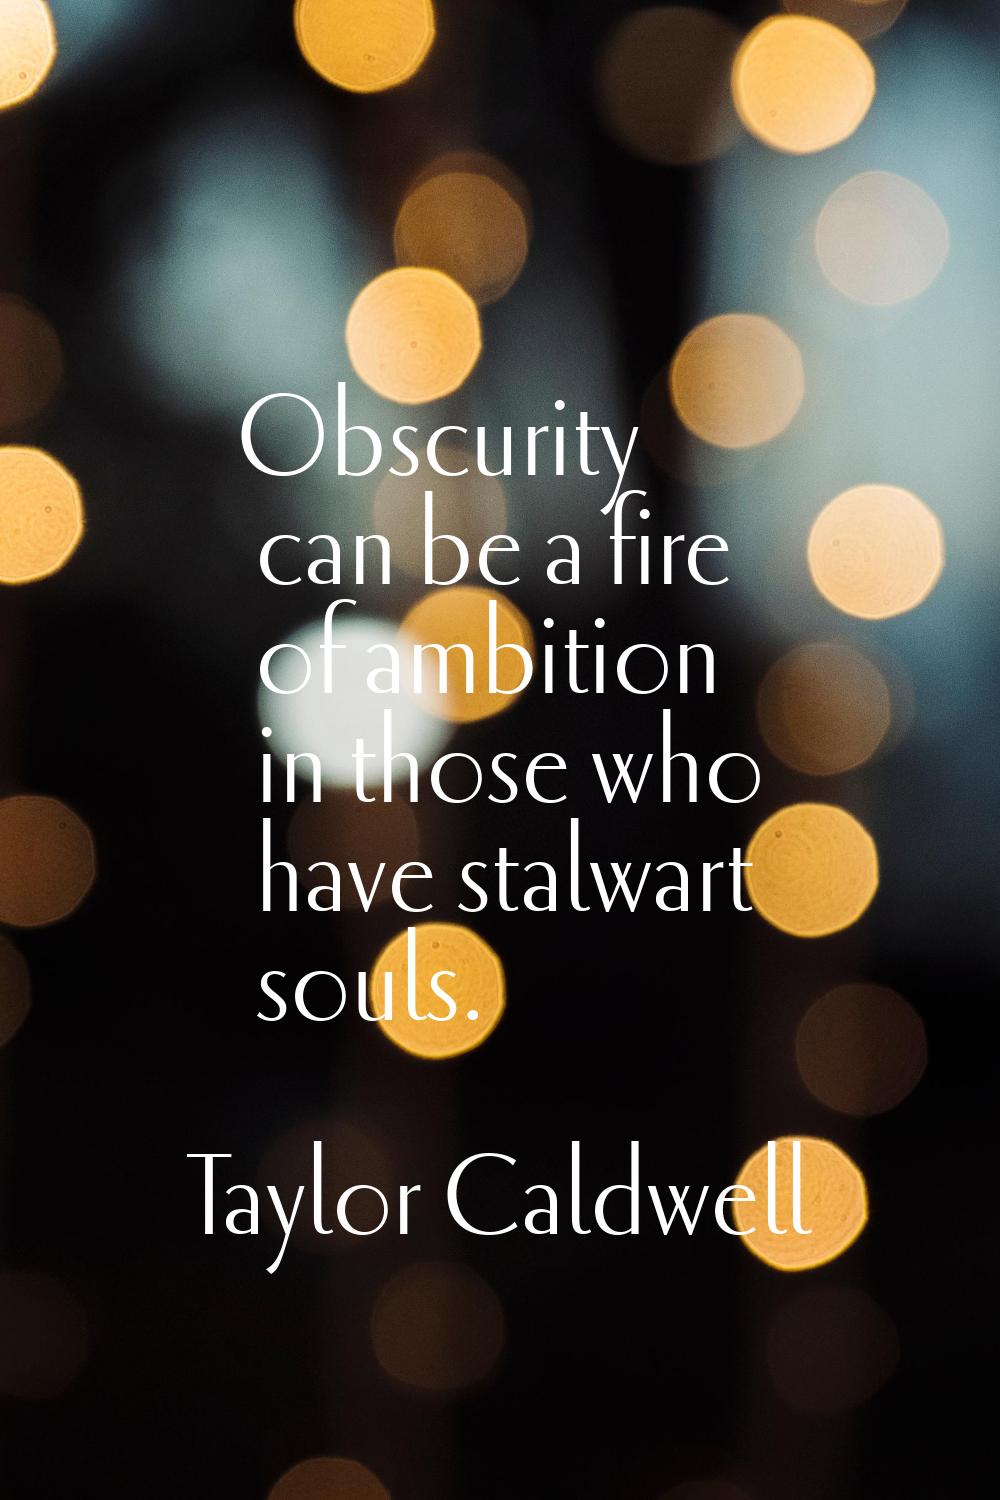 Obscurity can be a fire of ambition in those who have stalwart souls.